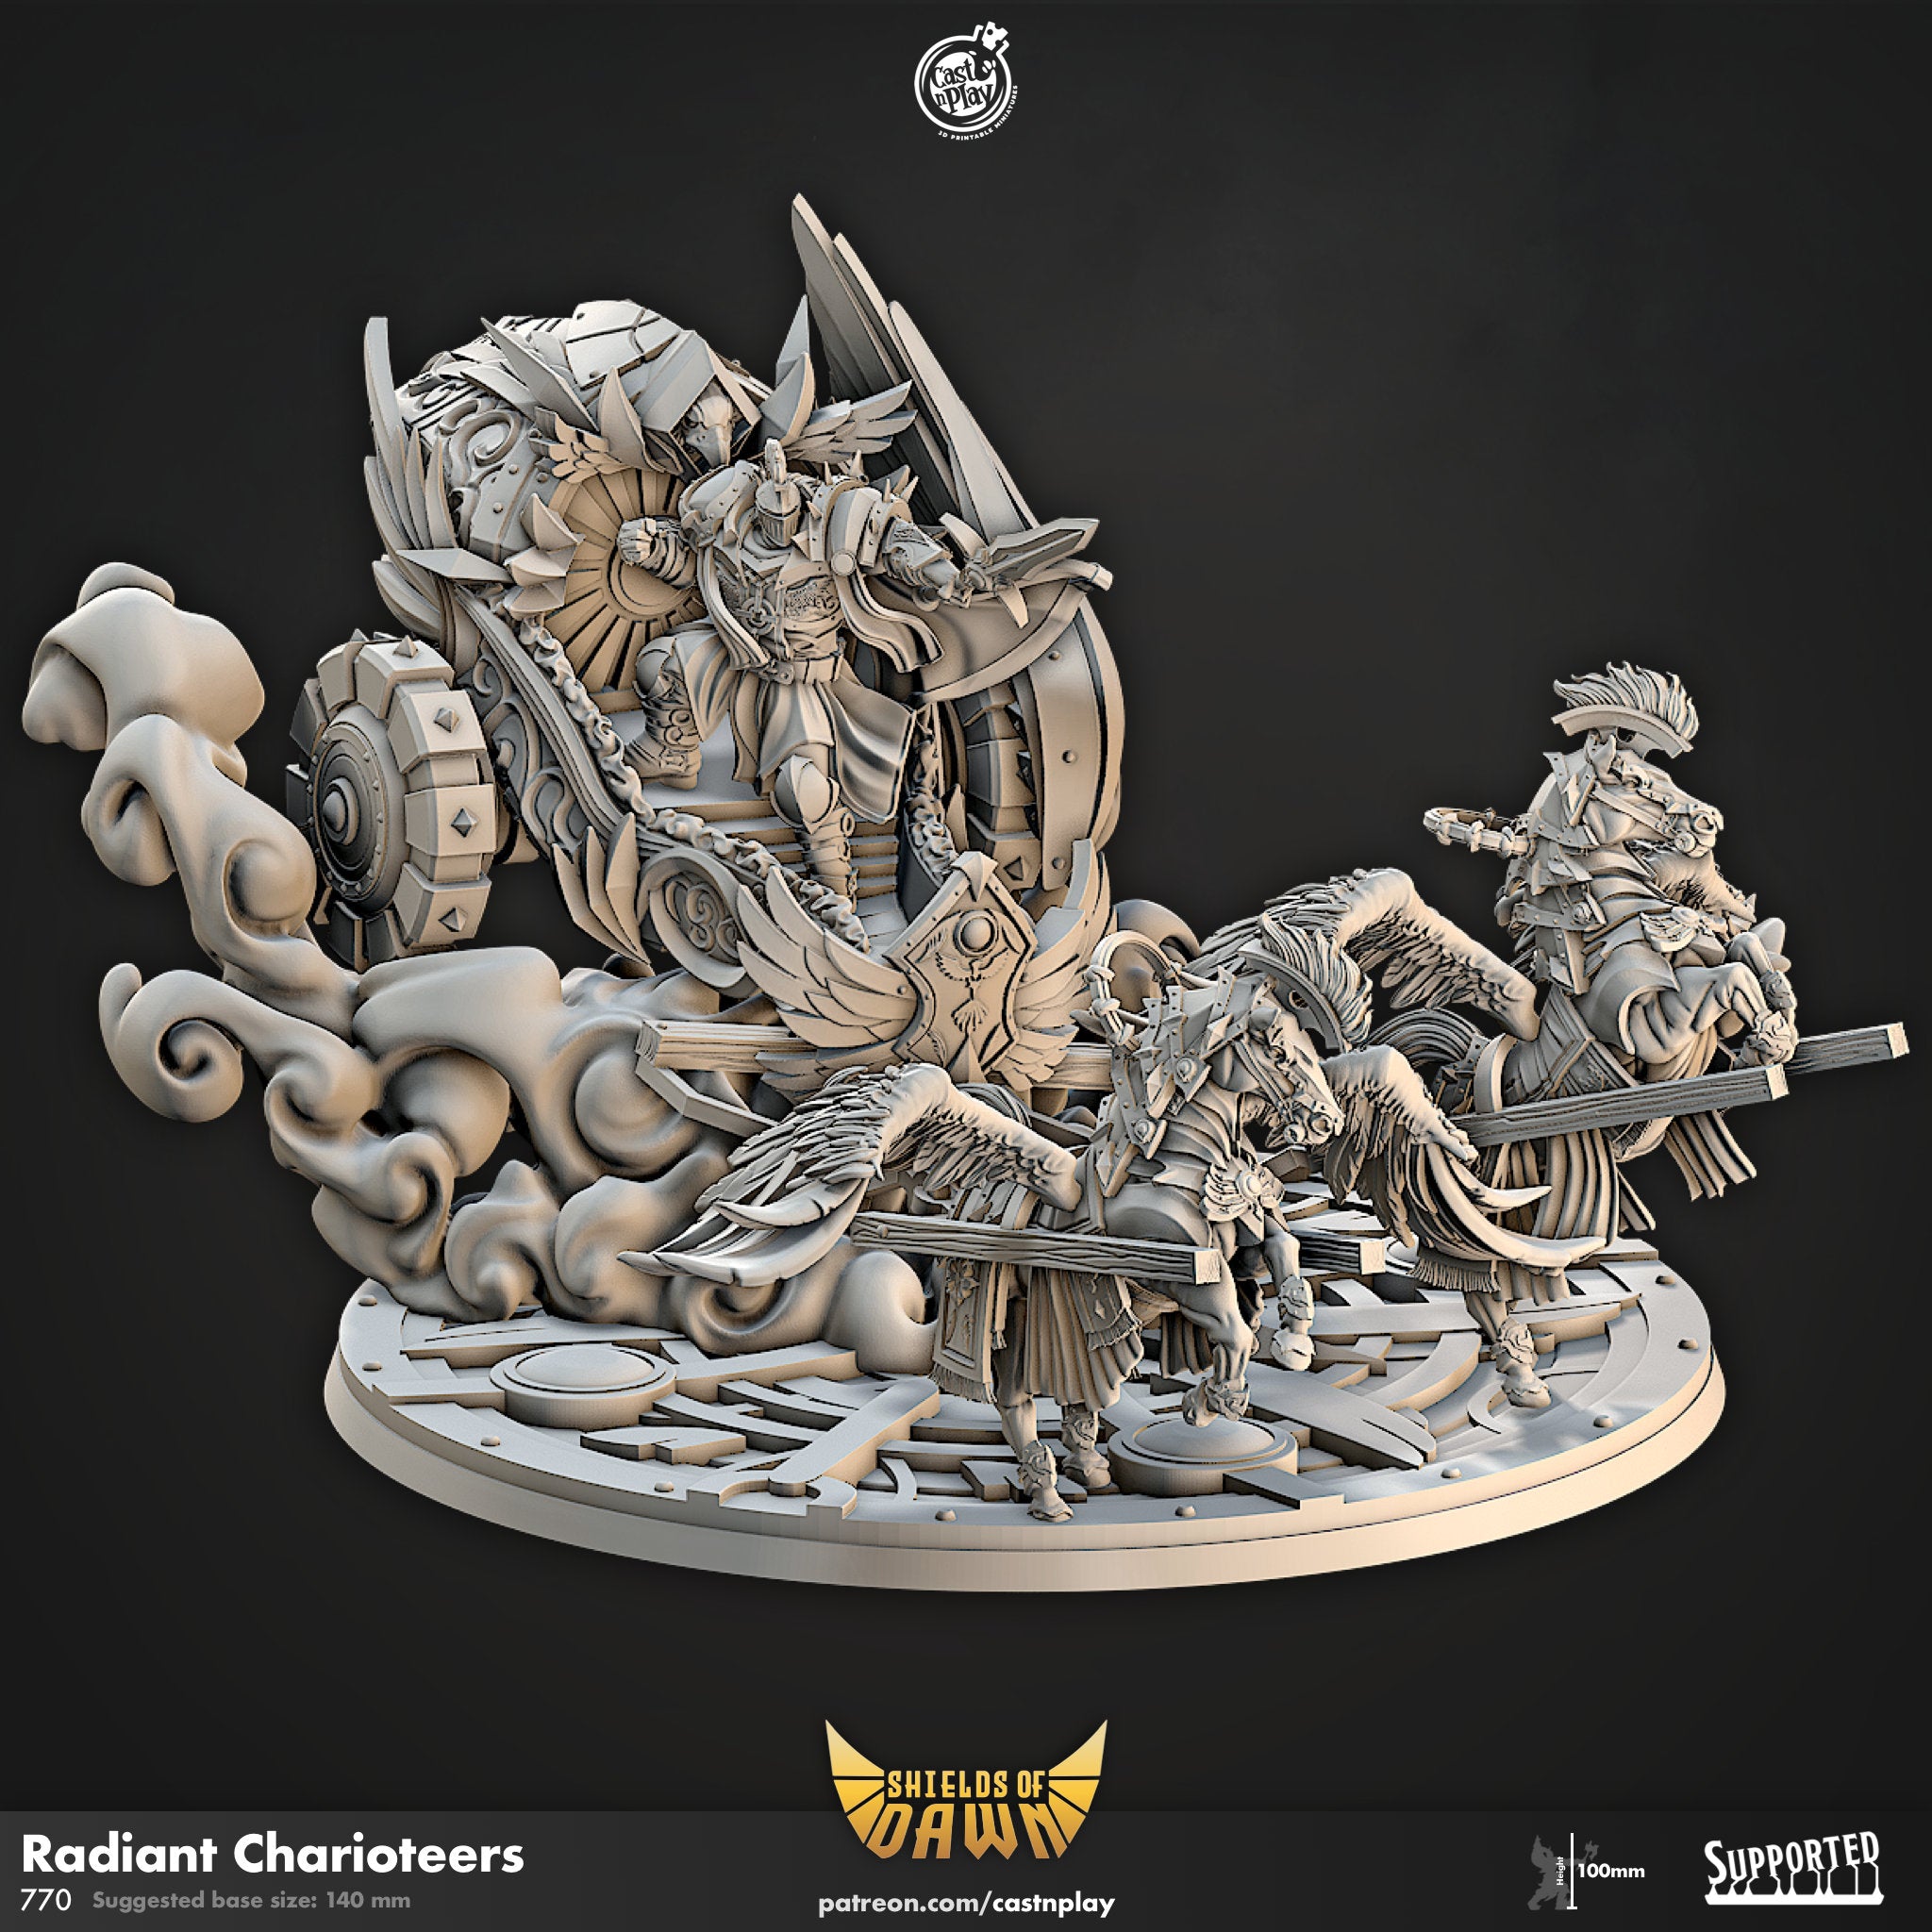 Radiant Charioteers Cast N Play (Shields of Dawn)